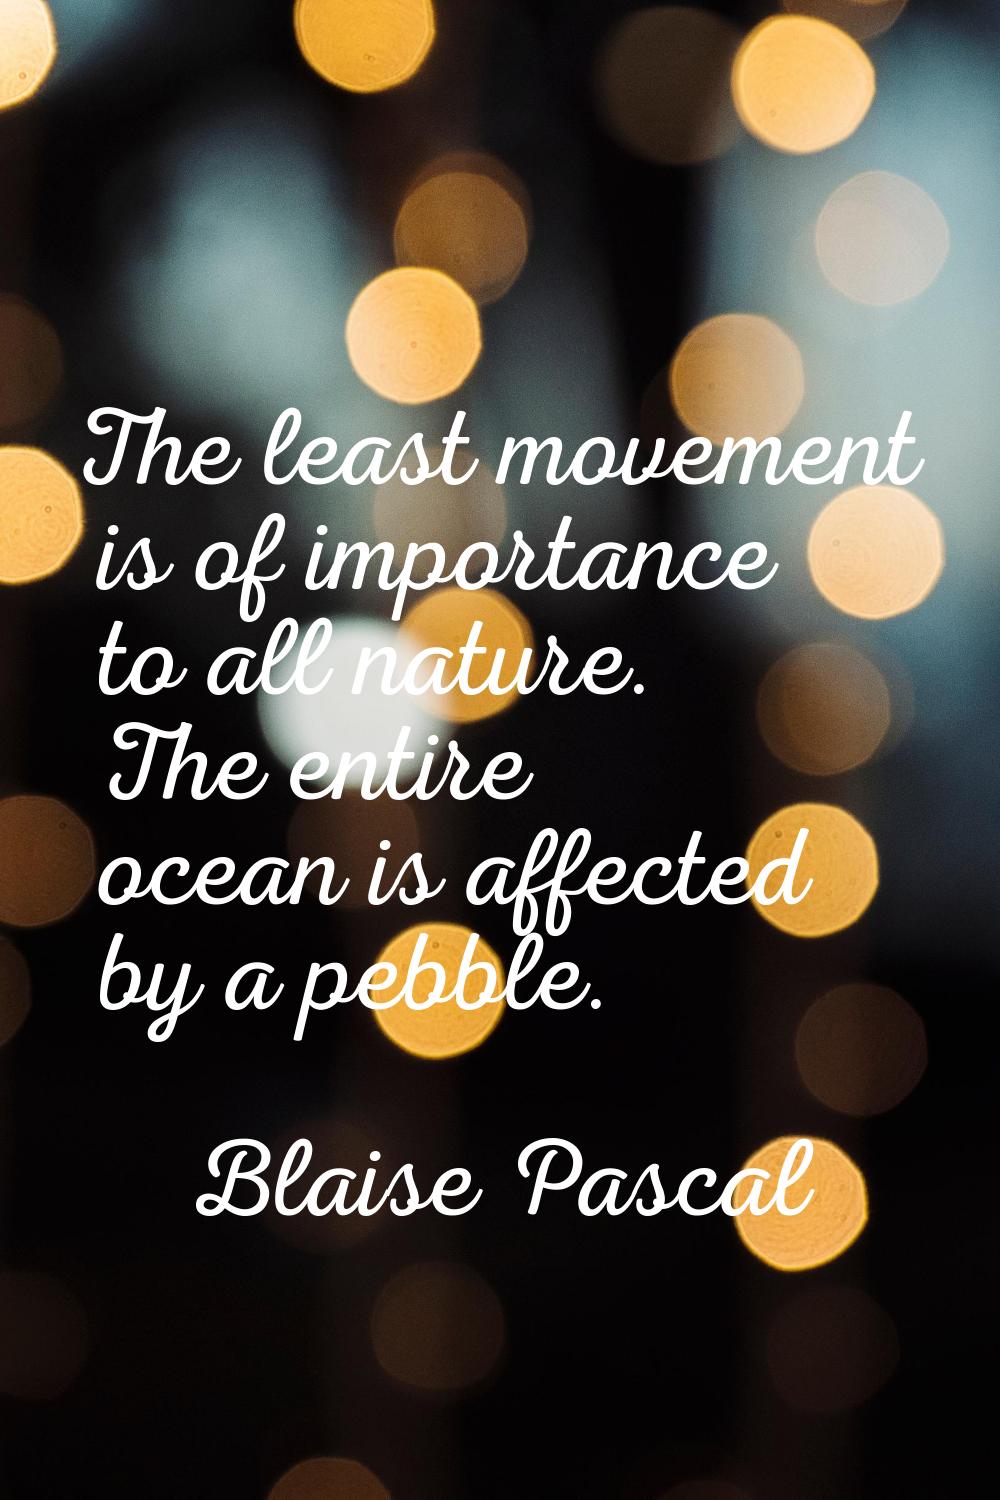 The least movement is of importance to all nature. The entire ocean is affected by a pebble.